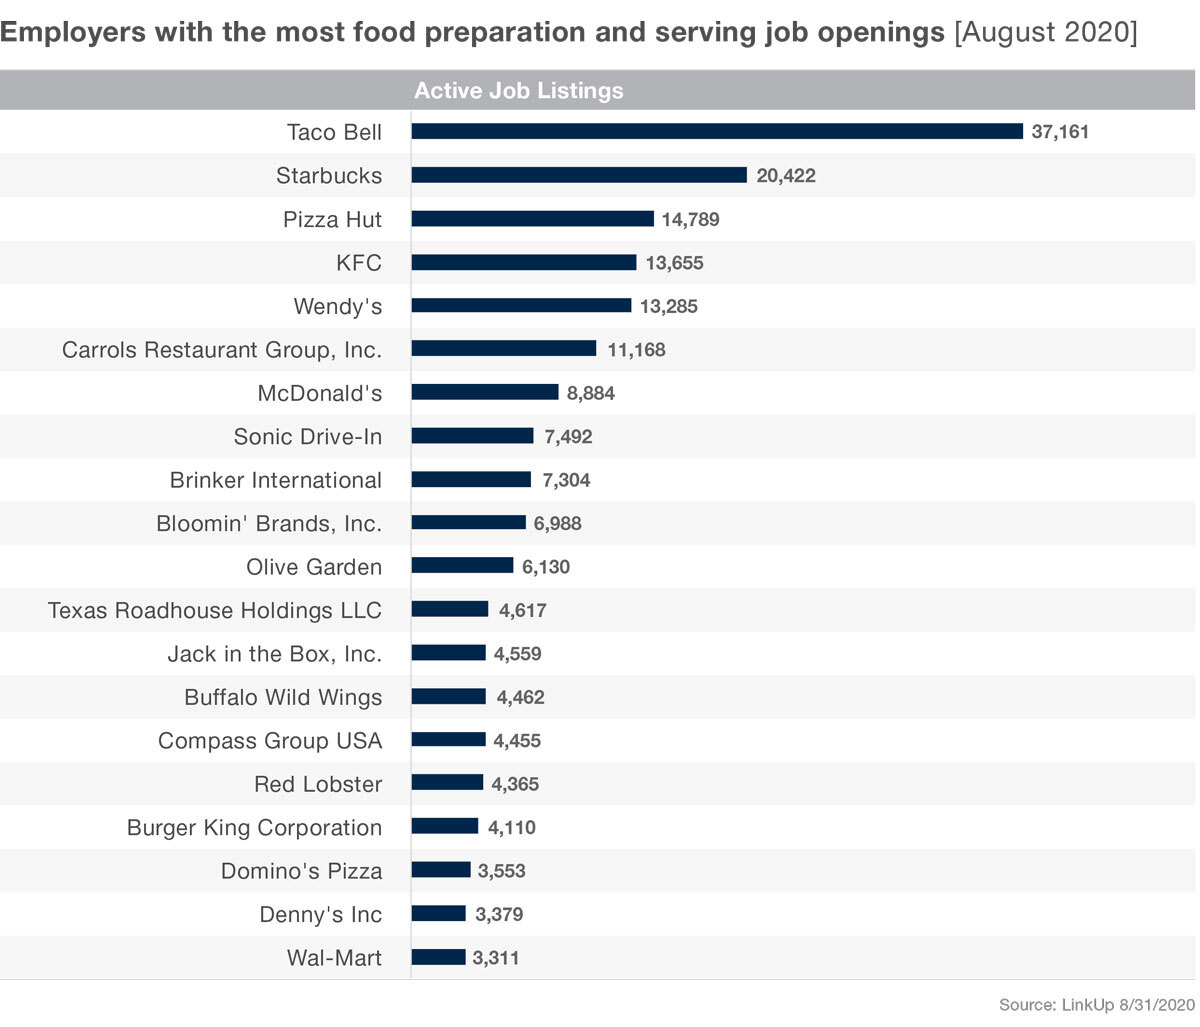 Employers with the most food prep and serving job openings in August 2020